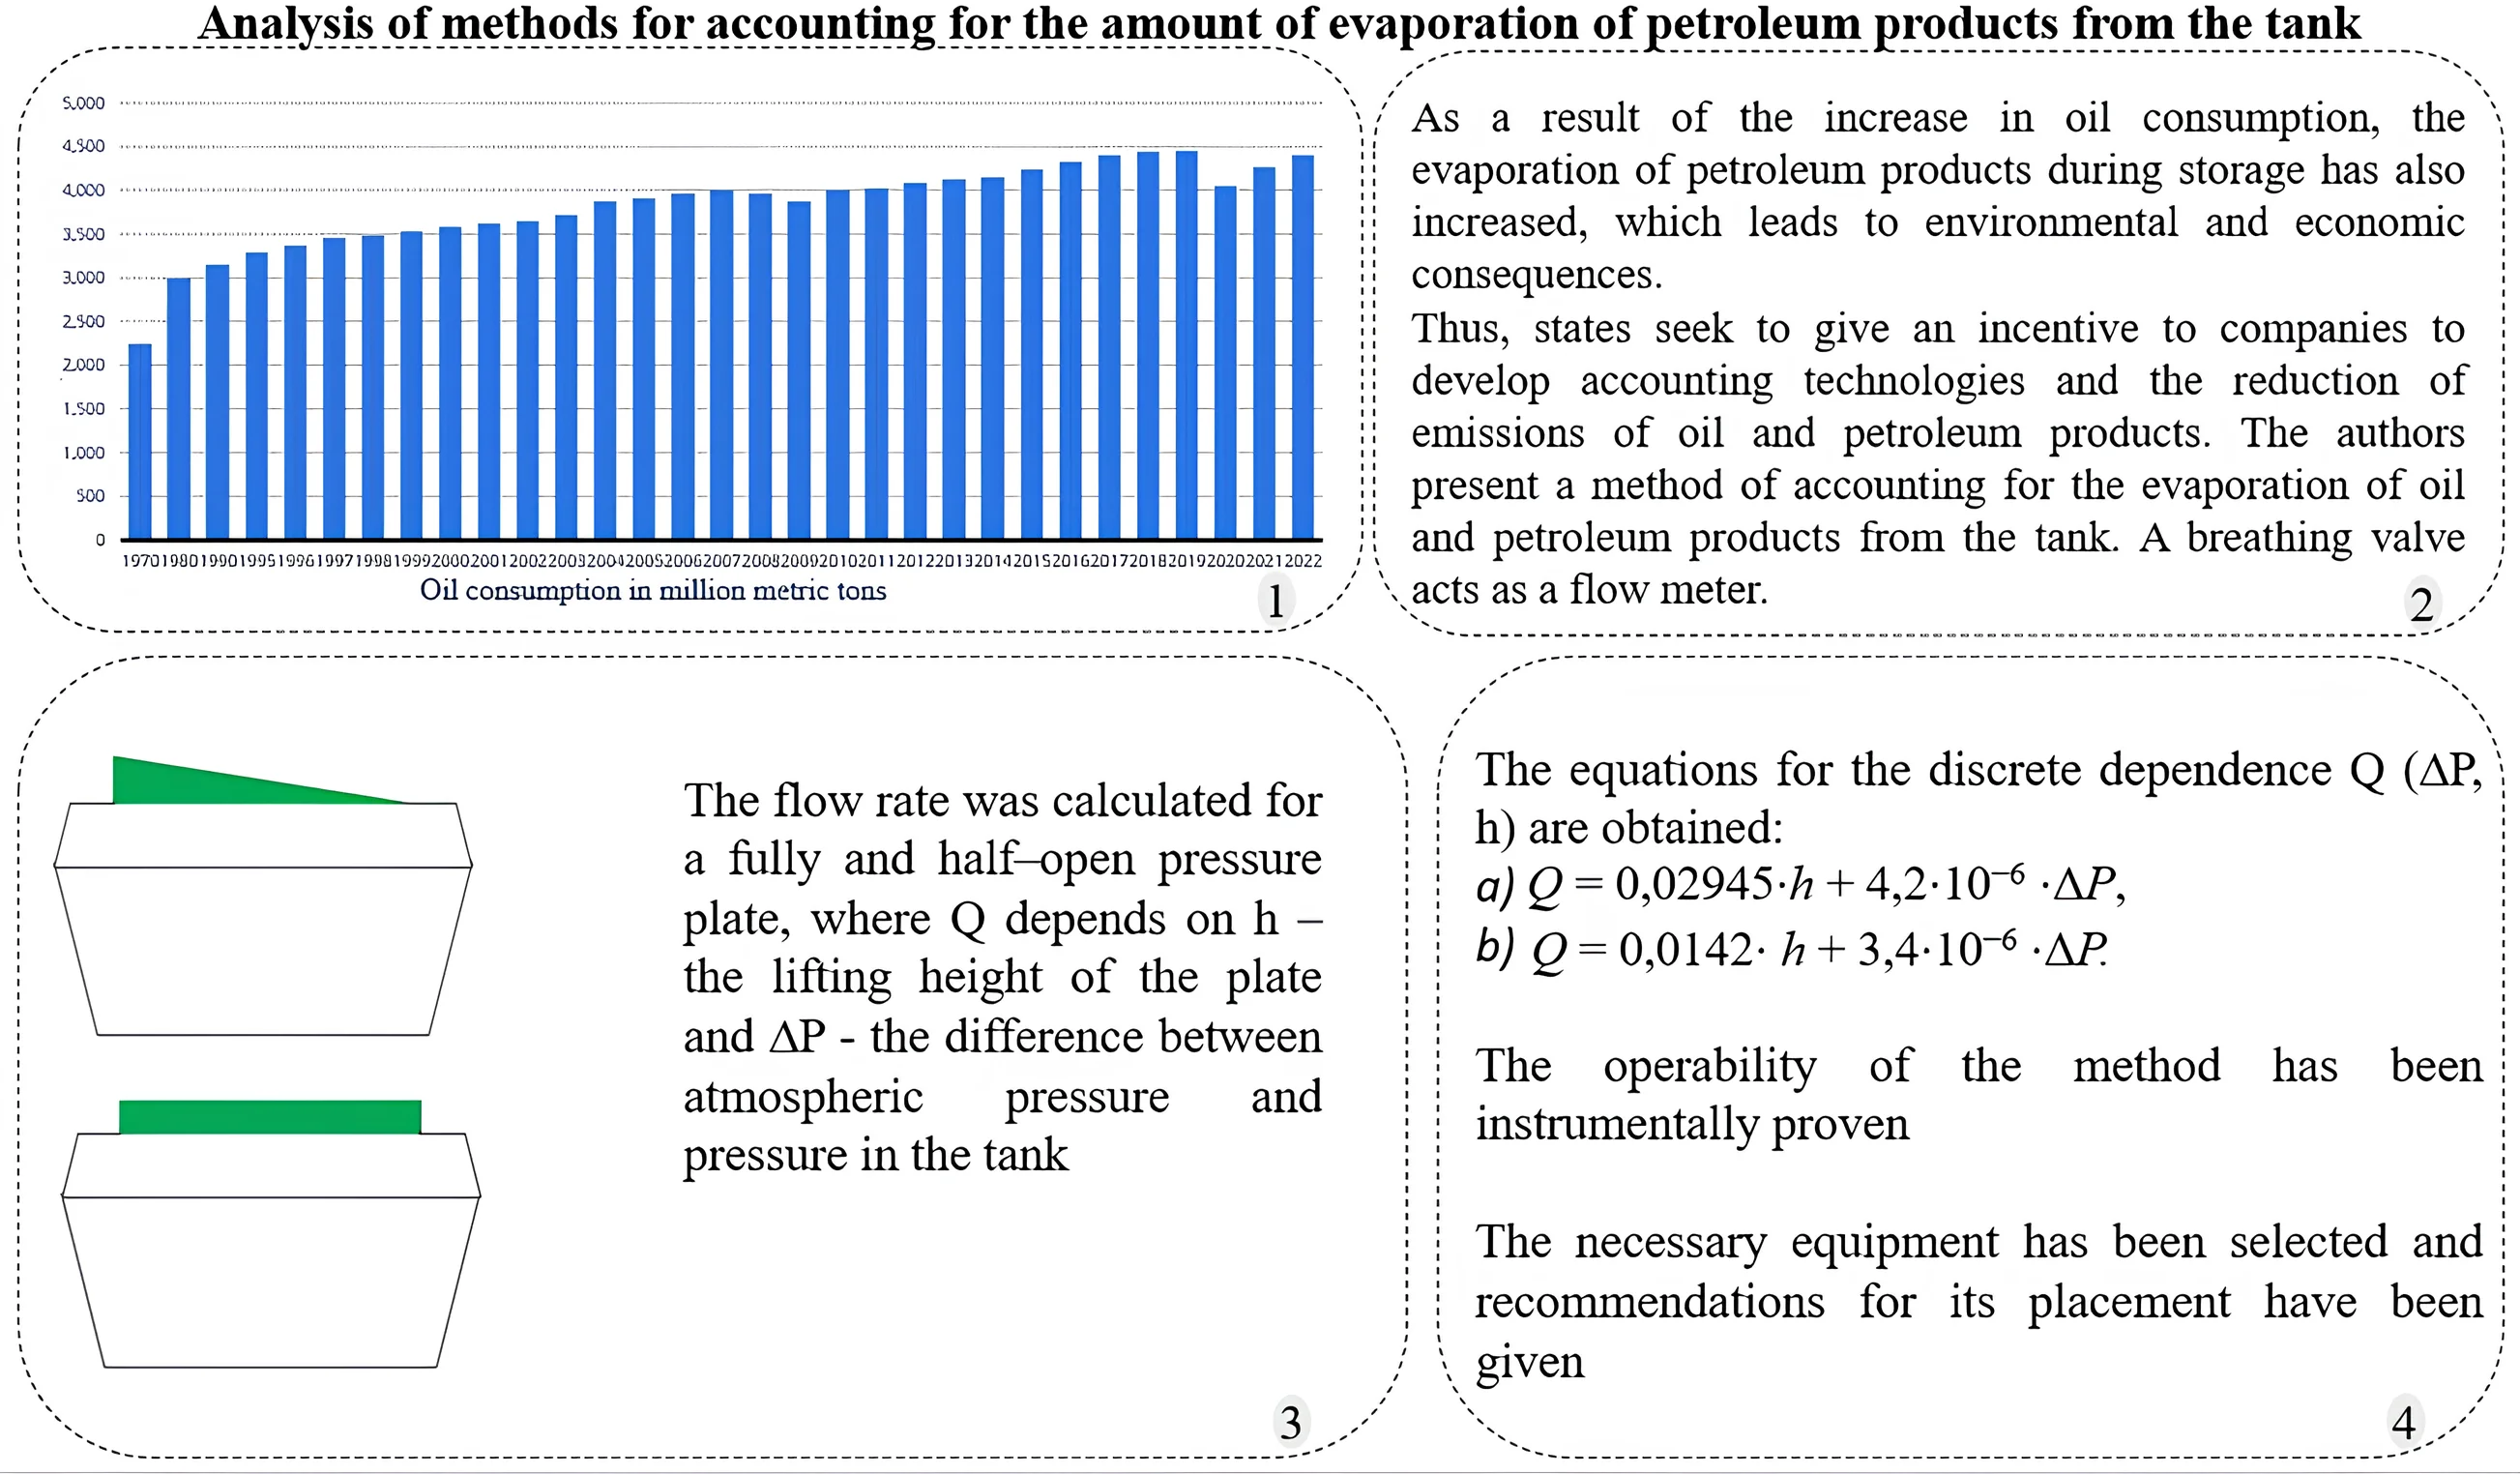 Analysis of methods for accounting for the amount of evaporation of petroleum products from the tank